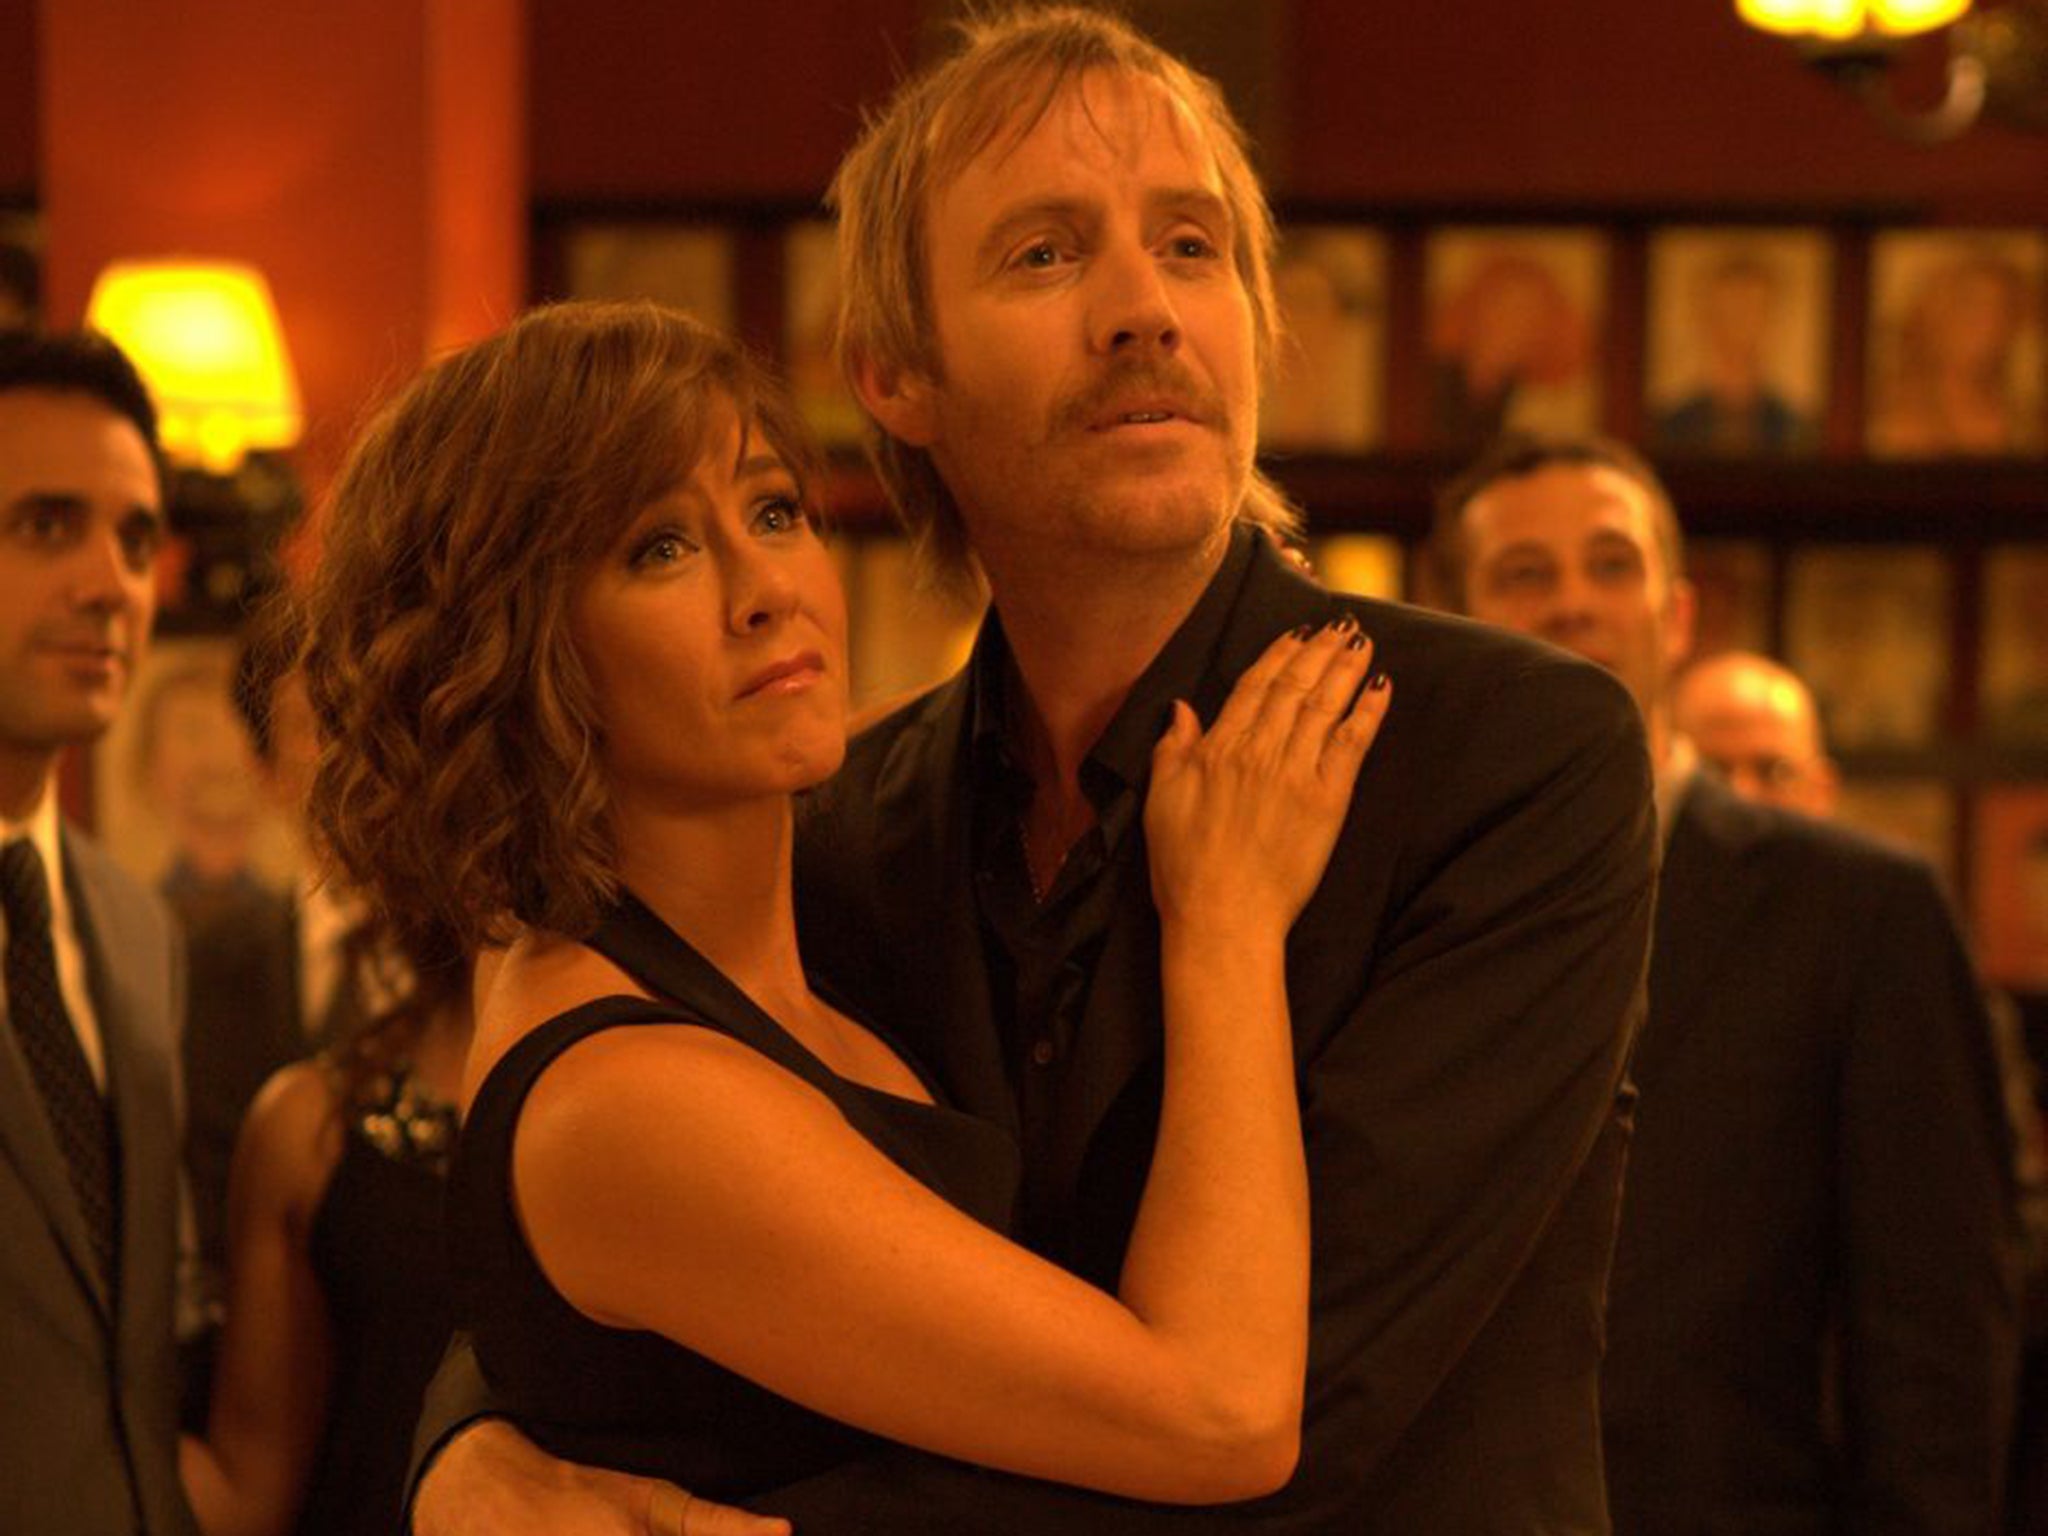 Jennifer Aniston and Rhys Ifans in ‘She’s Funny That Way’